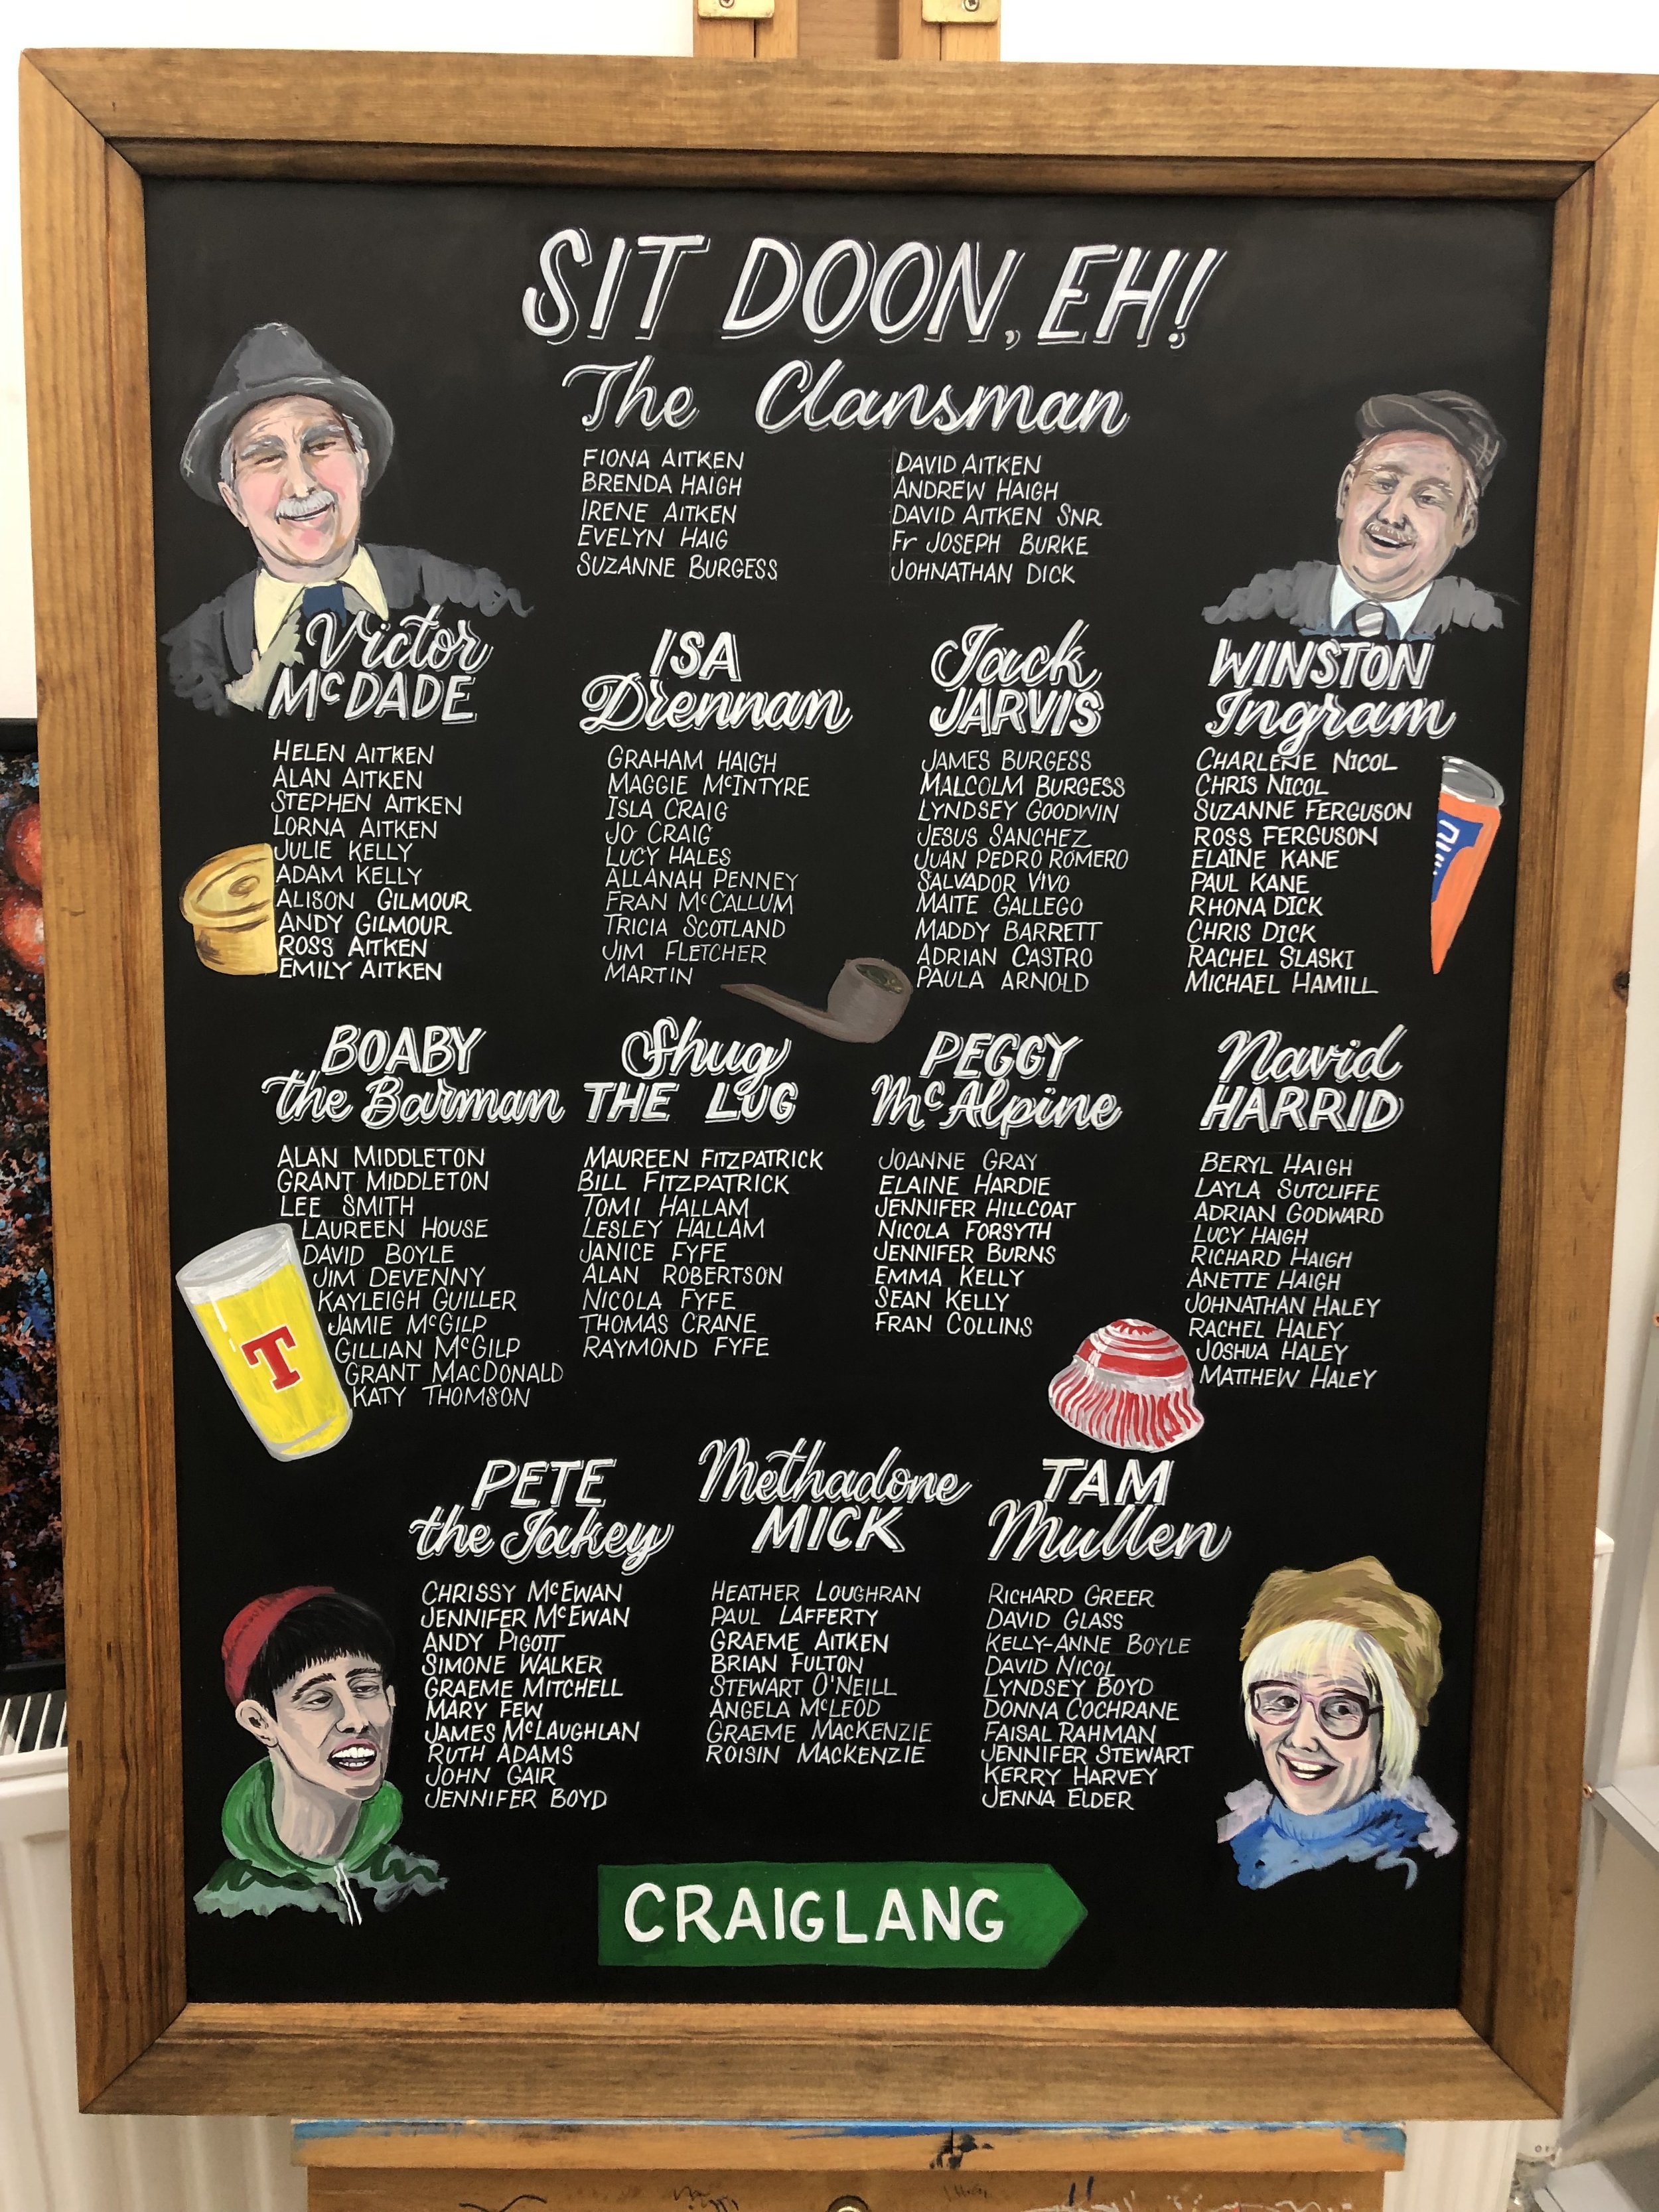  A keepsake chalk board showing the table plan is written out under the heading of SIT DOWN EH! and has a wooden frame around it. Various characters, food and drink are drawn out across it in chalk too. 